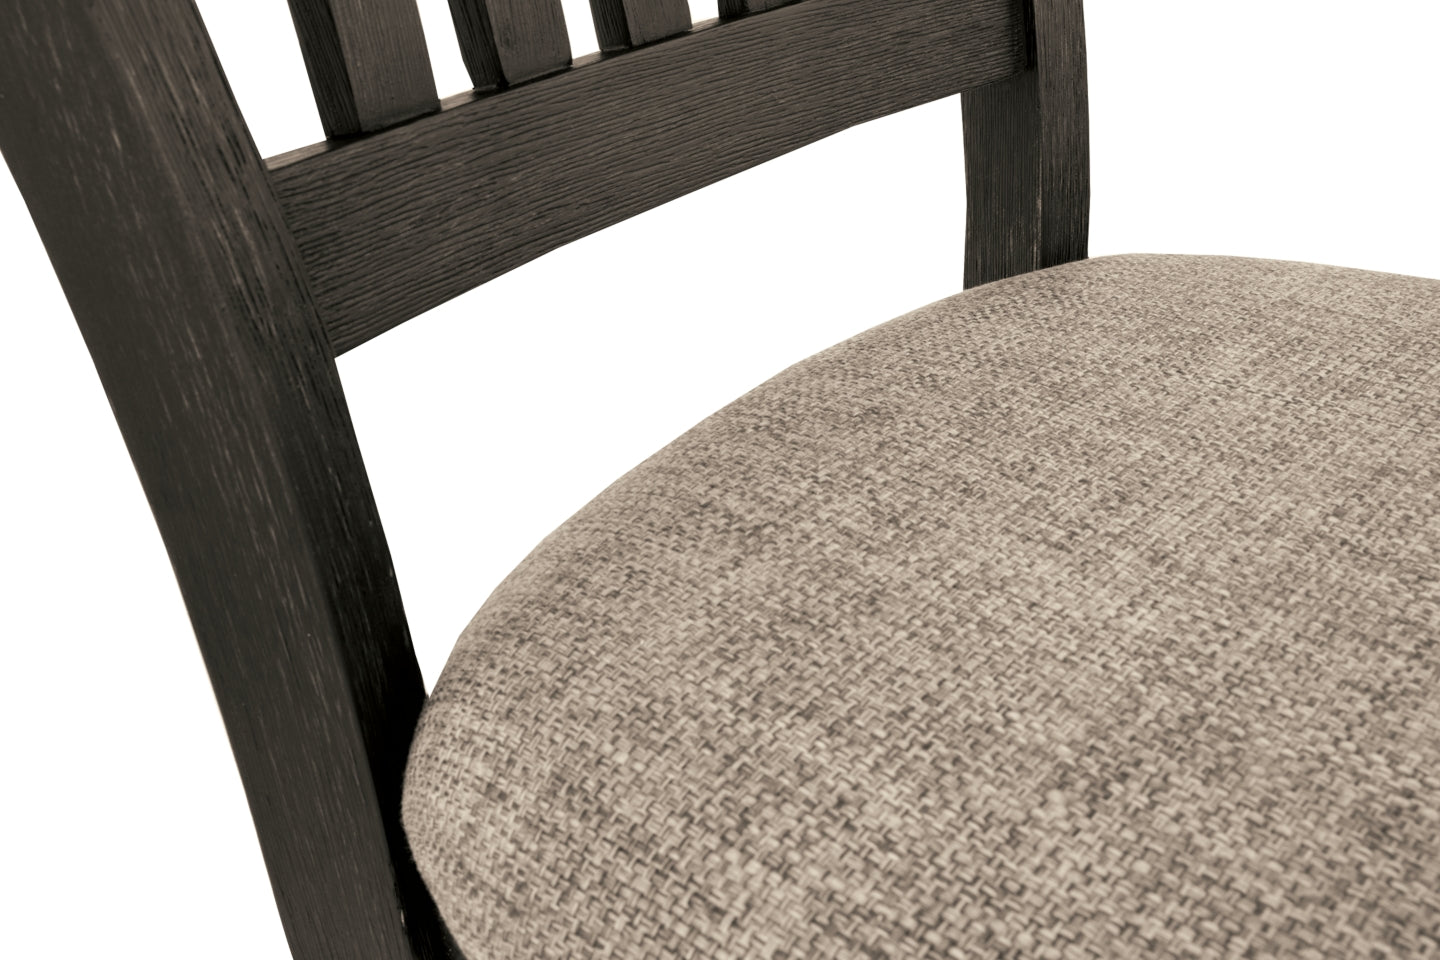 Tyler Creek Dining Table and 6 Chairs - PKG000214